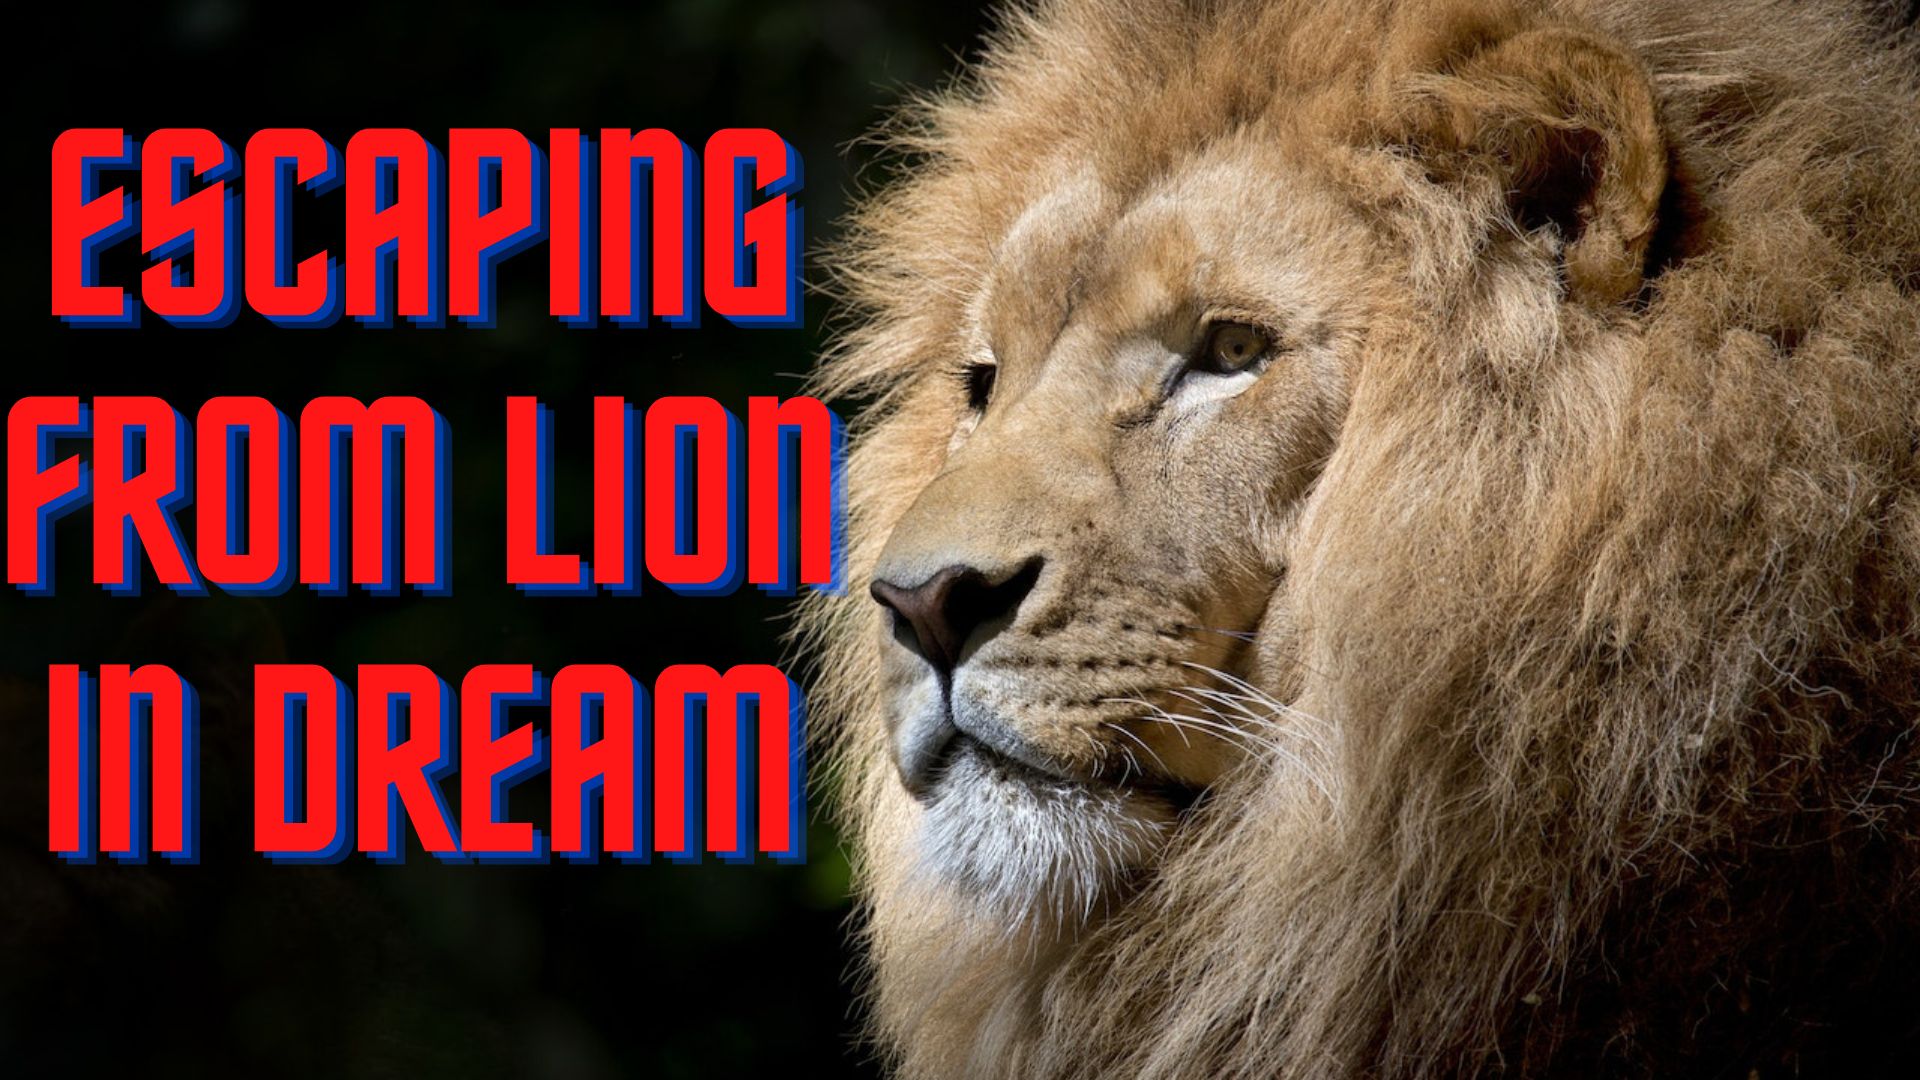 Escaping From Lion In Dream - A Sign Of Your Own Inner Transformation And Fire